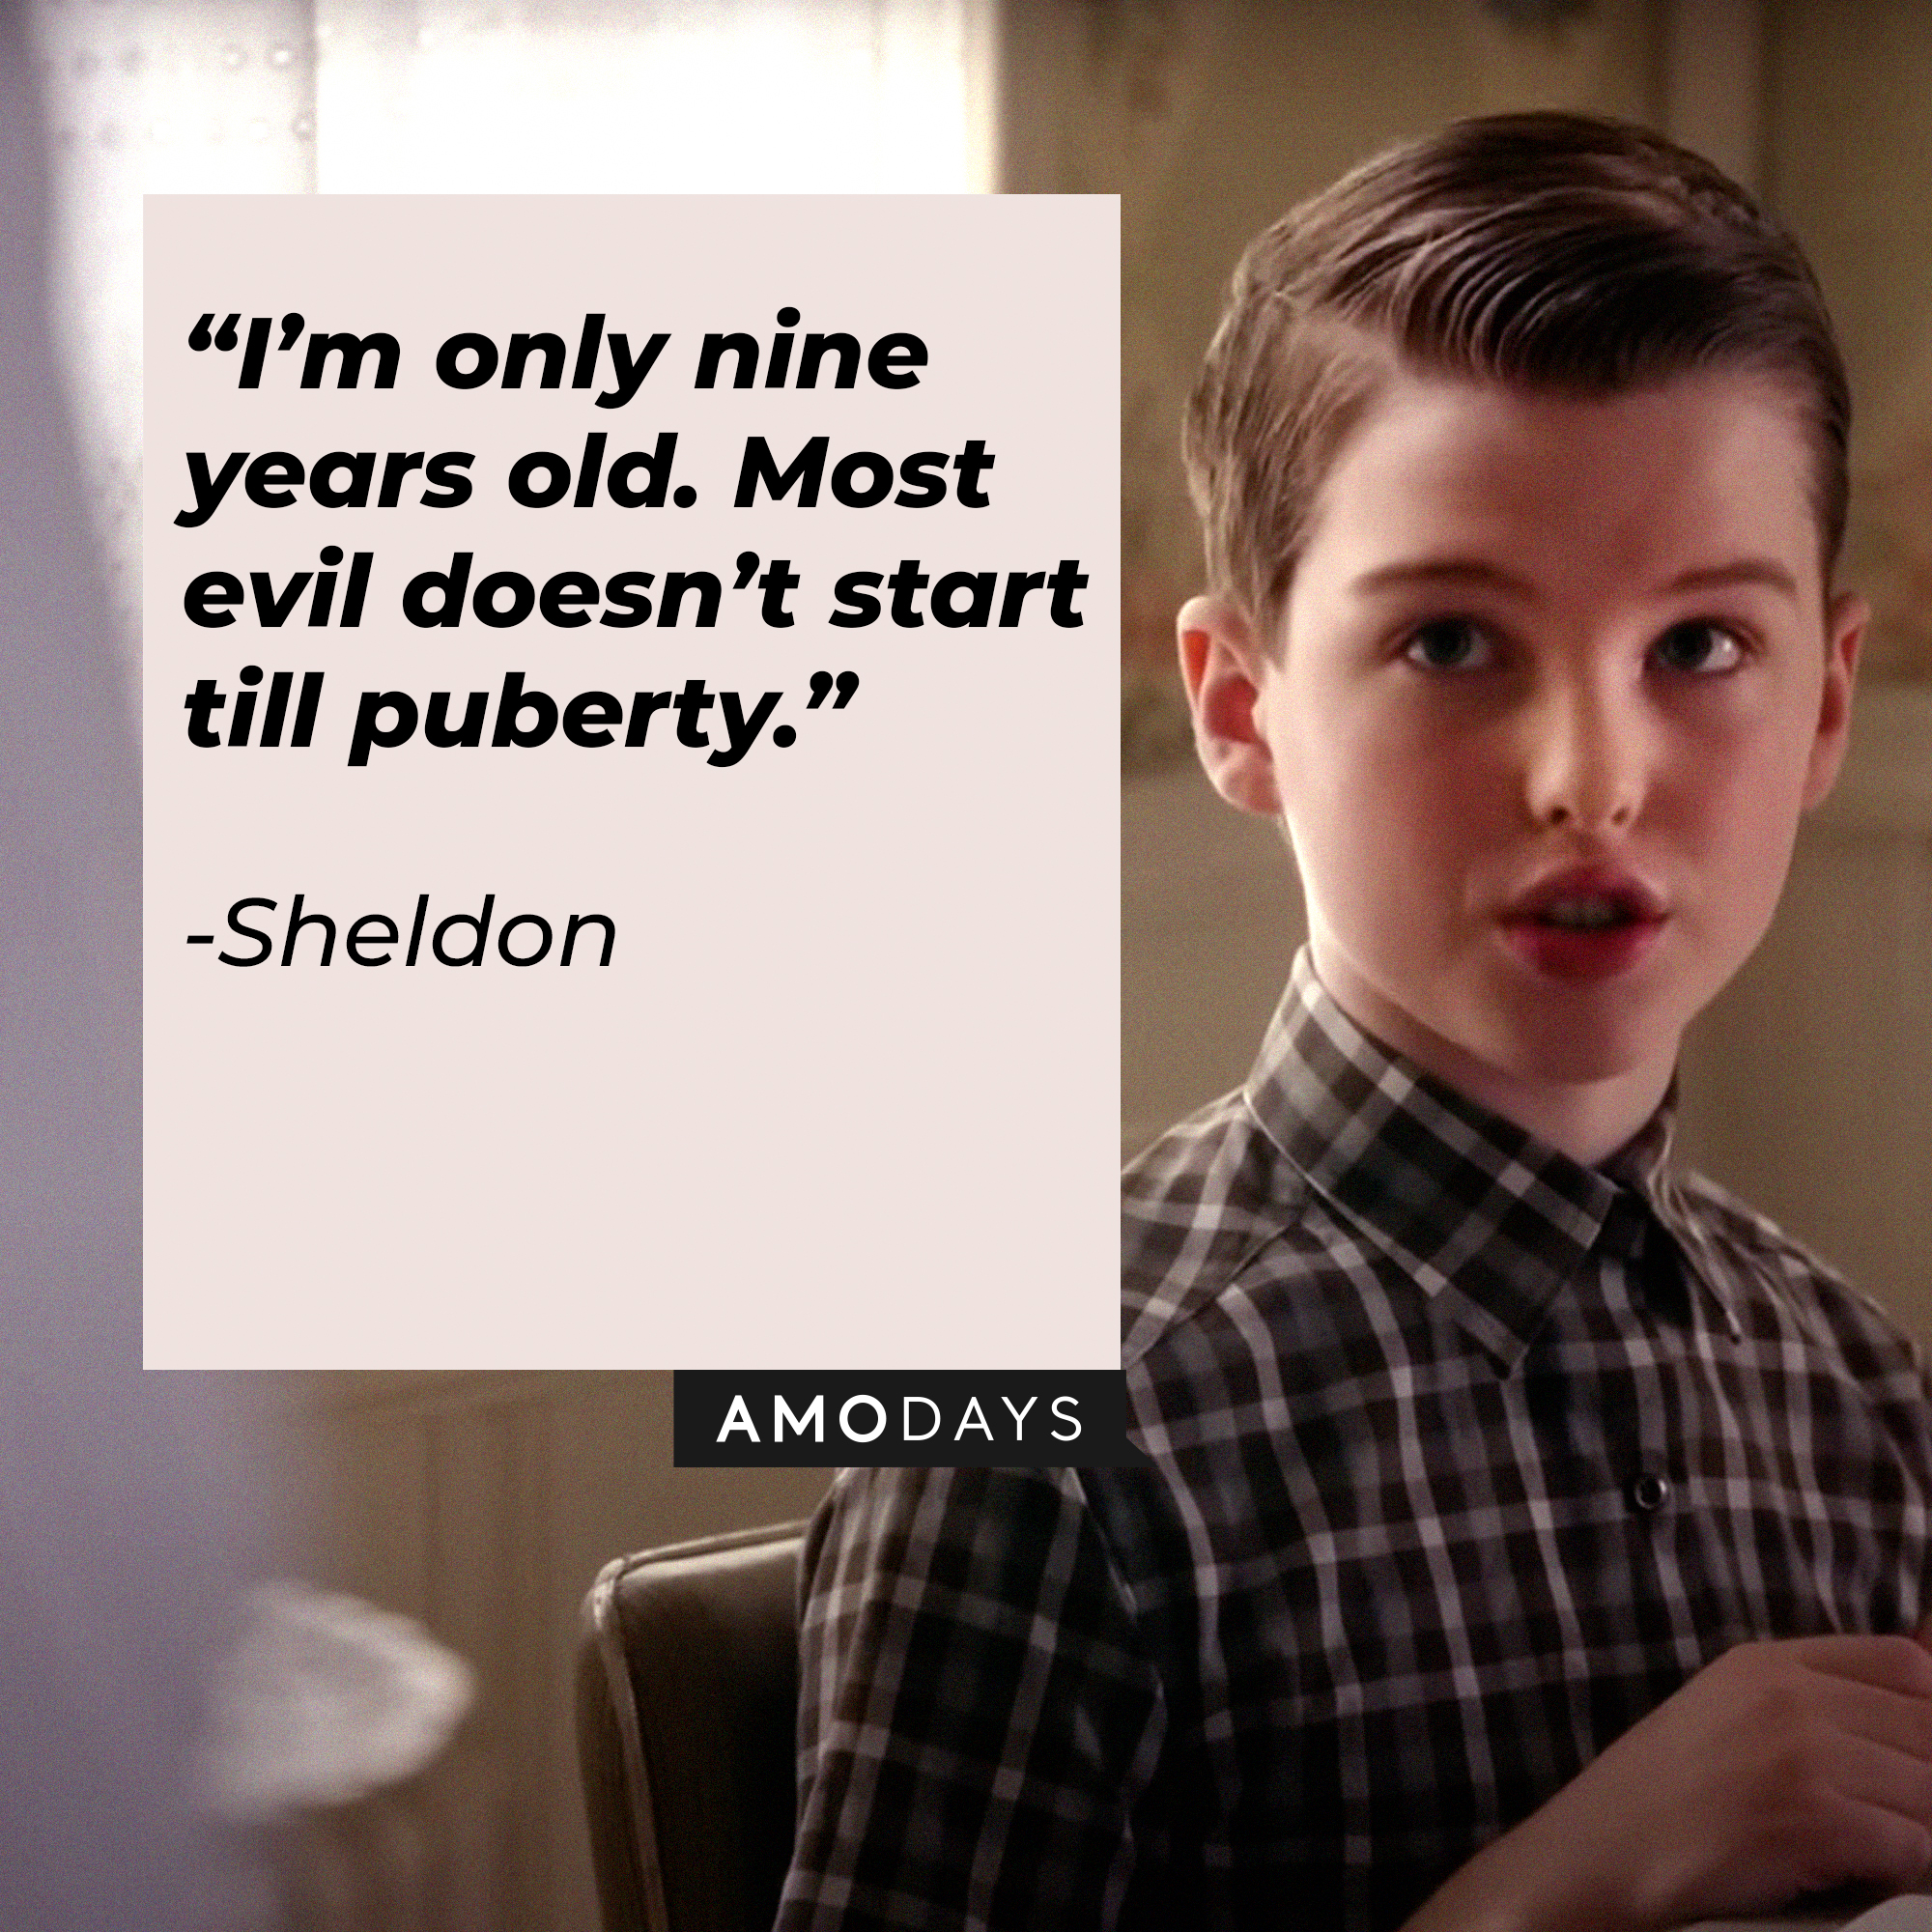 Sheldon's quote: “I’m only nine years old. Most evil doesn’t start till puberty.” | Source: facebook.com/YoungSheldonCBS